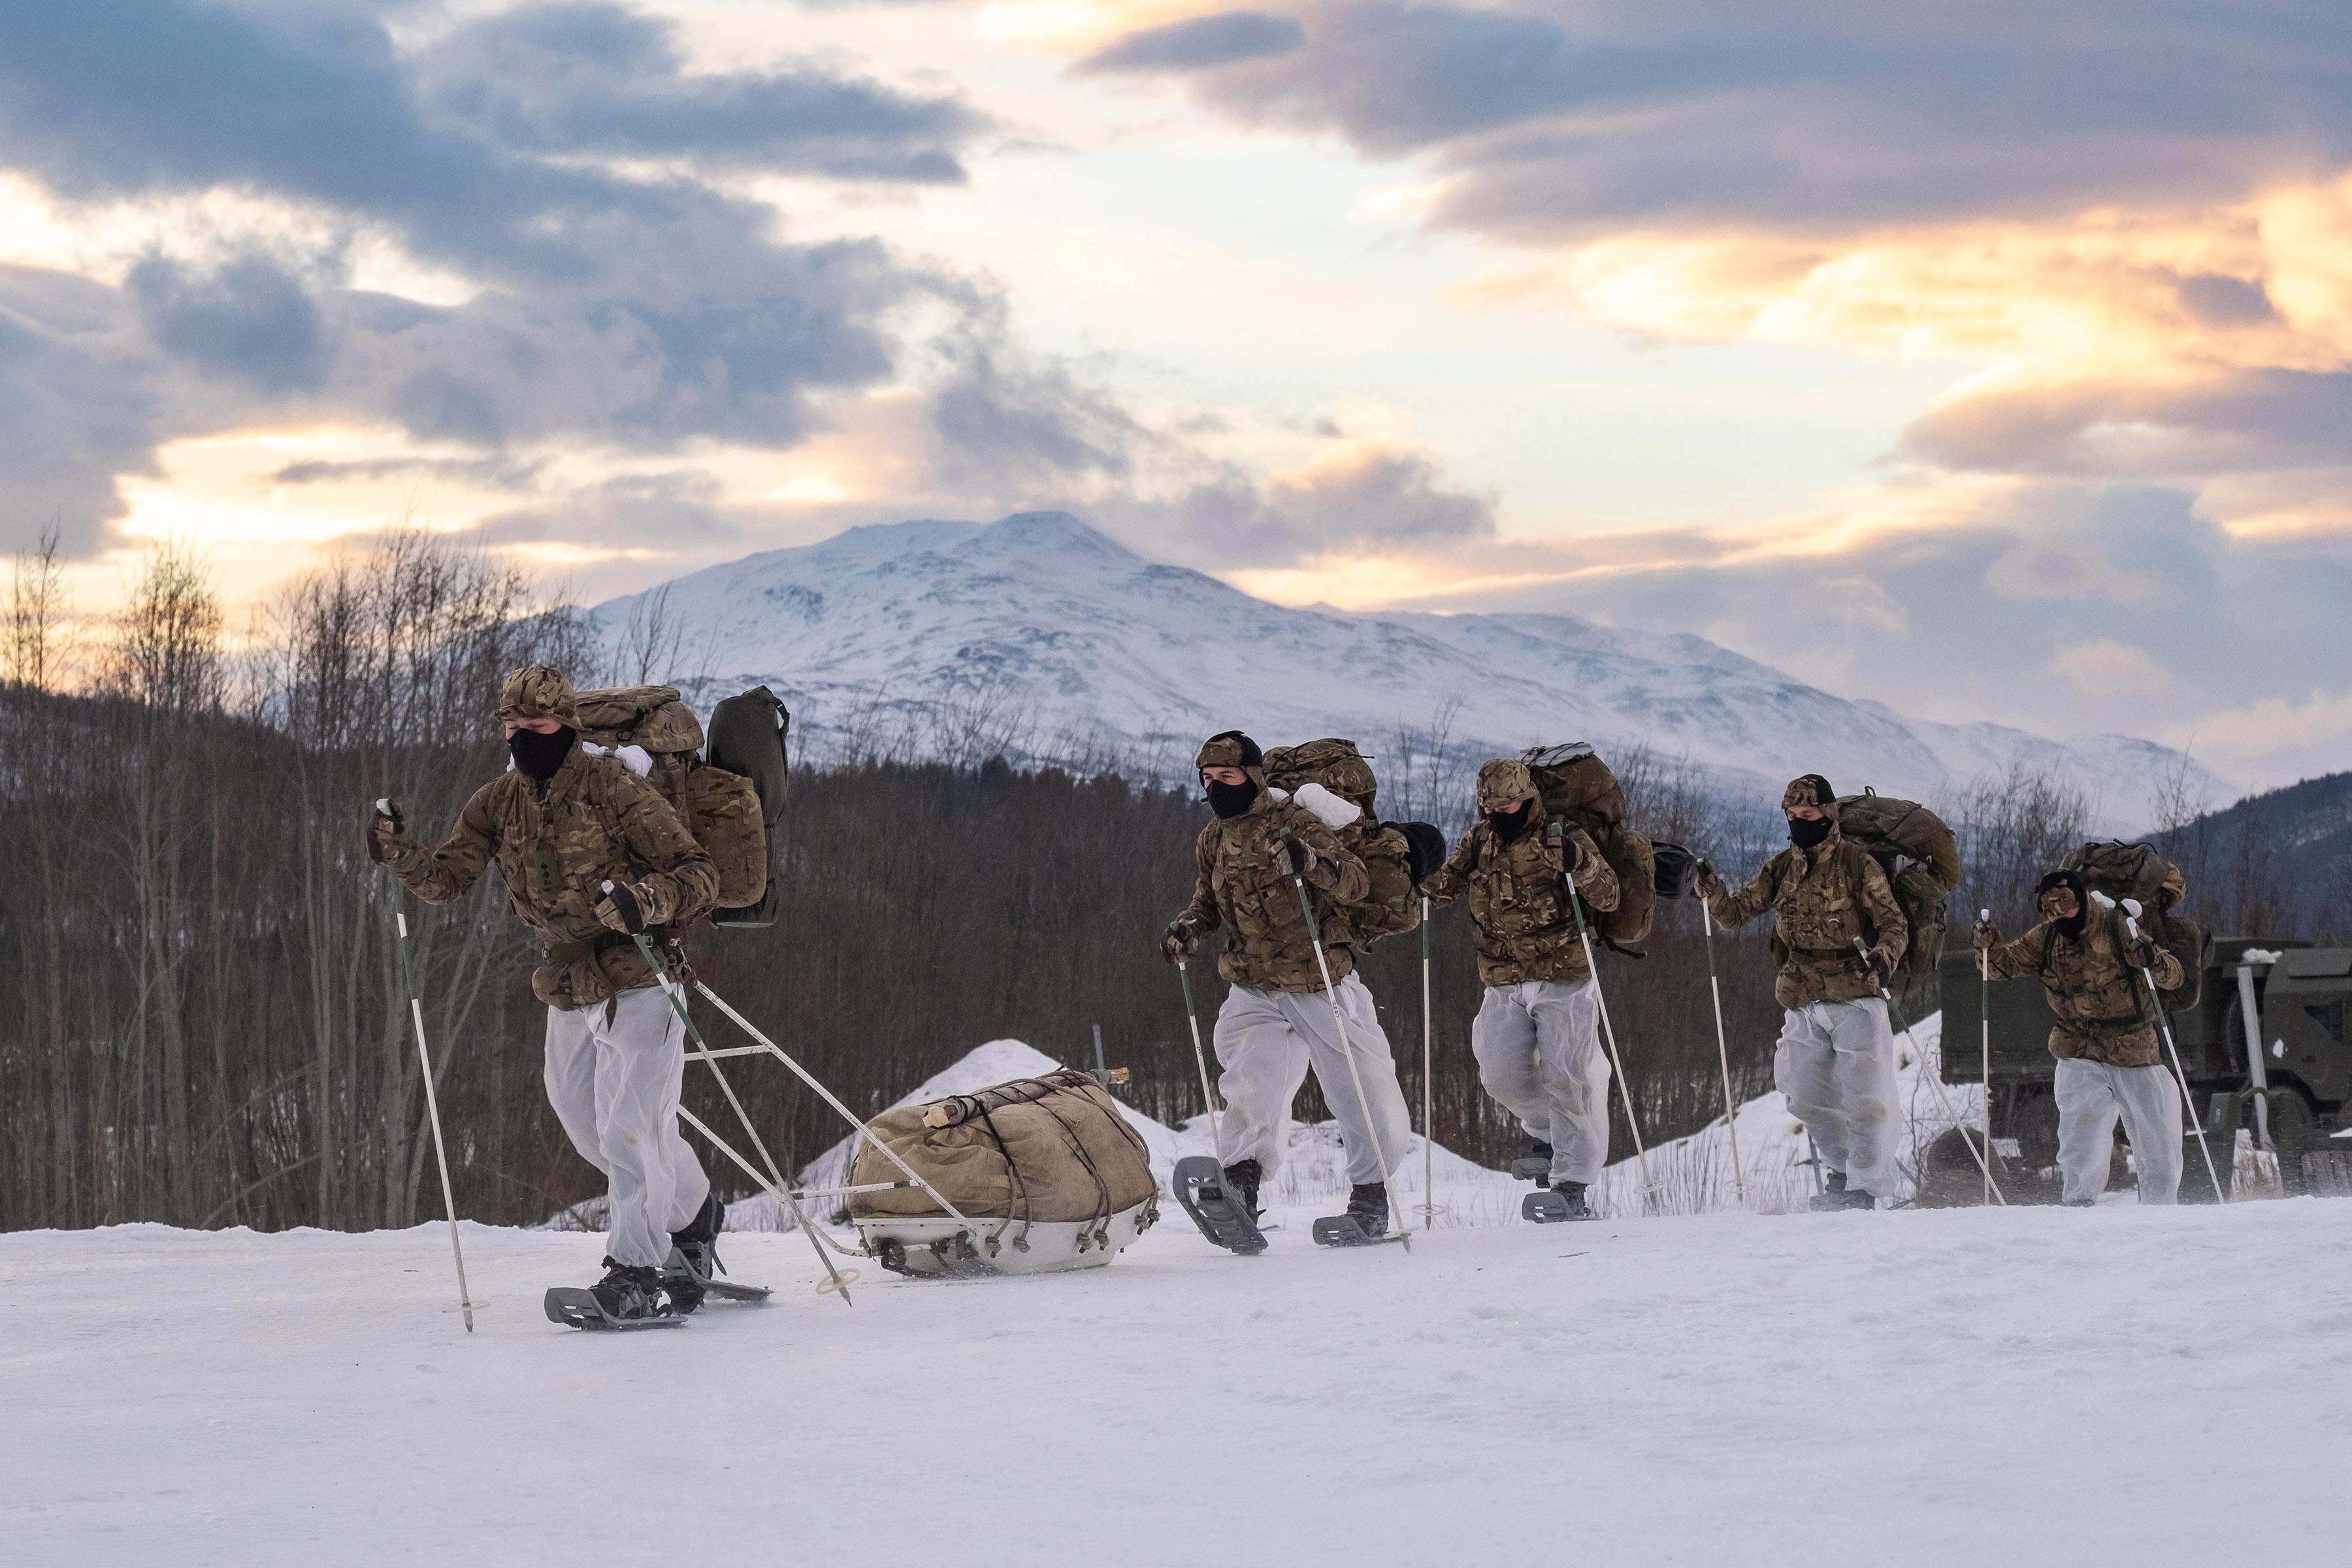 Group of soldiers marching in the snow with back packs, snow shoes and ski poles